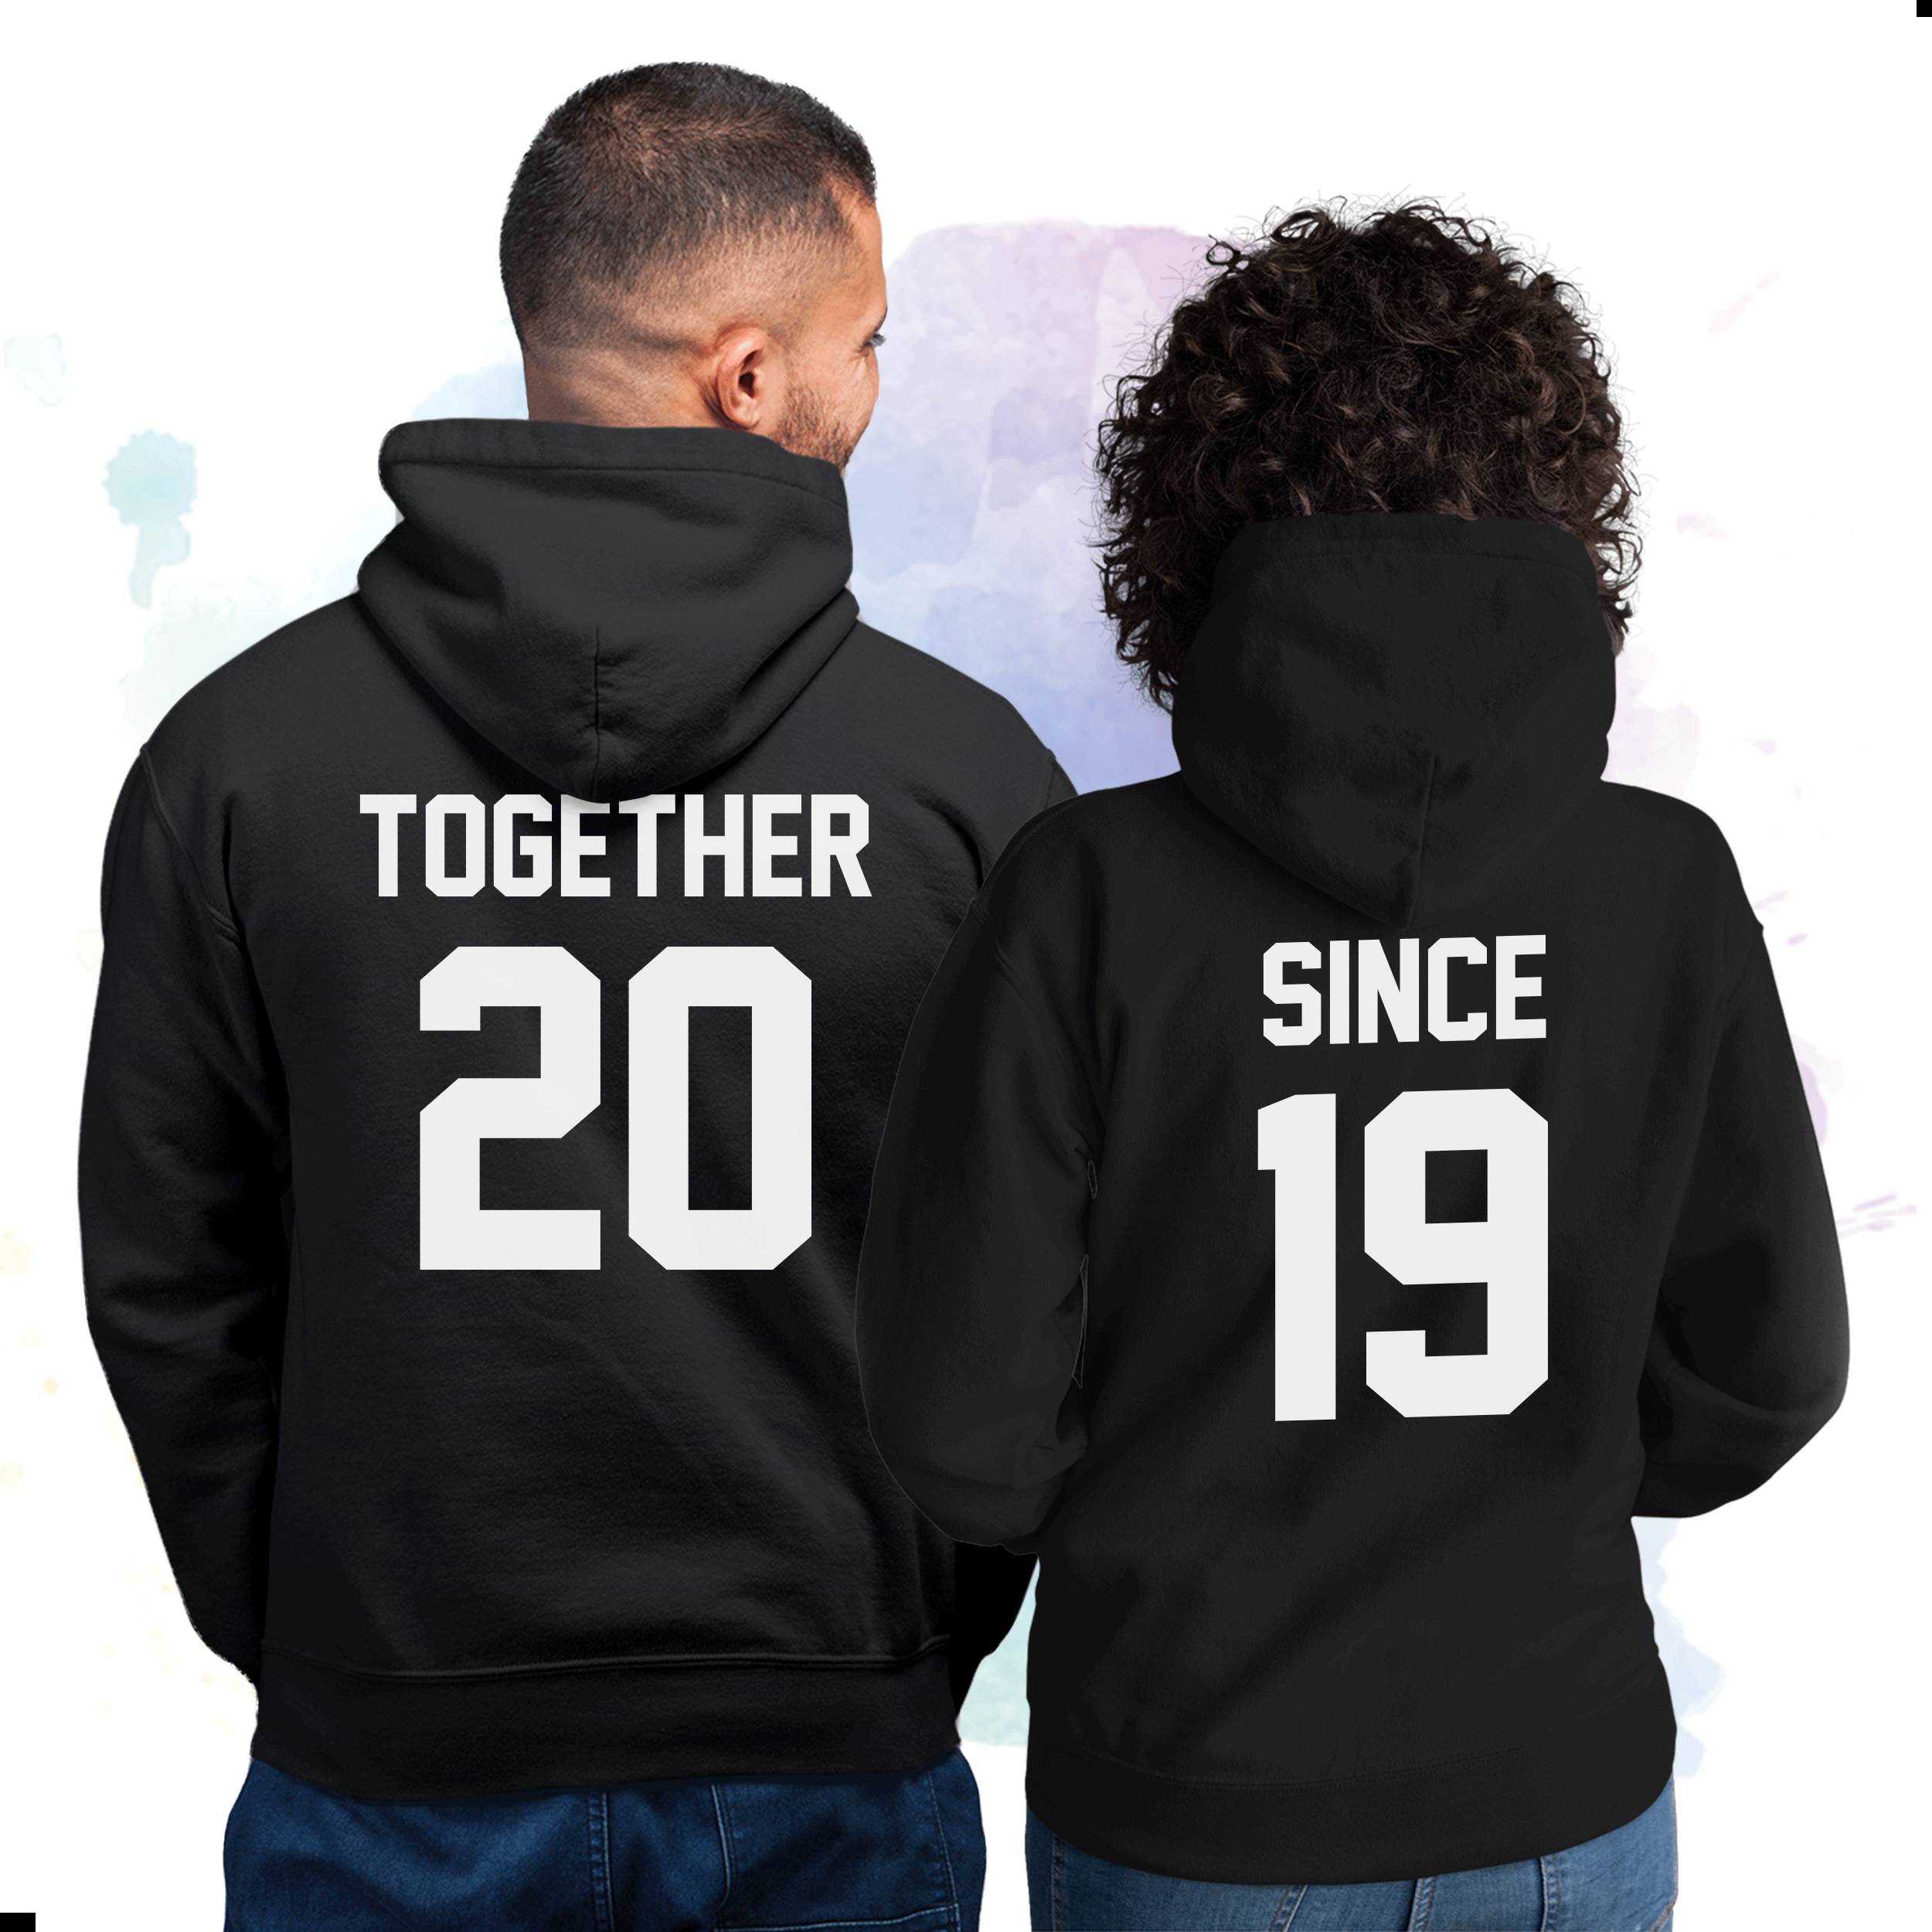 Couples Matching Hoodies  Matching hoodies for couples, Couples hoodies,  Matching couples sweatshirts